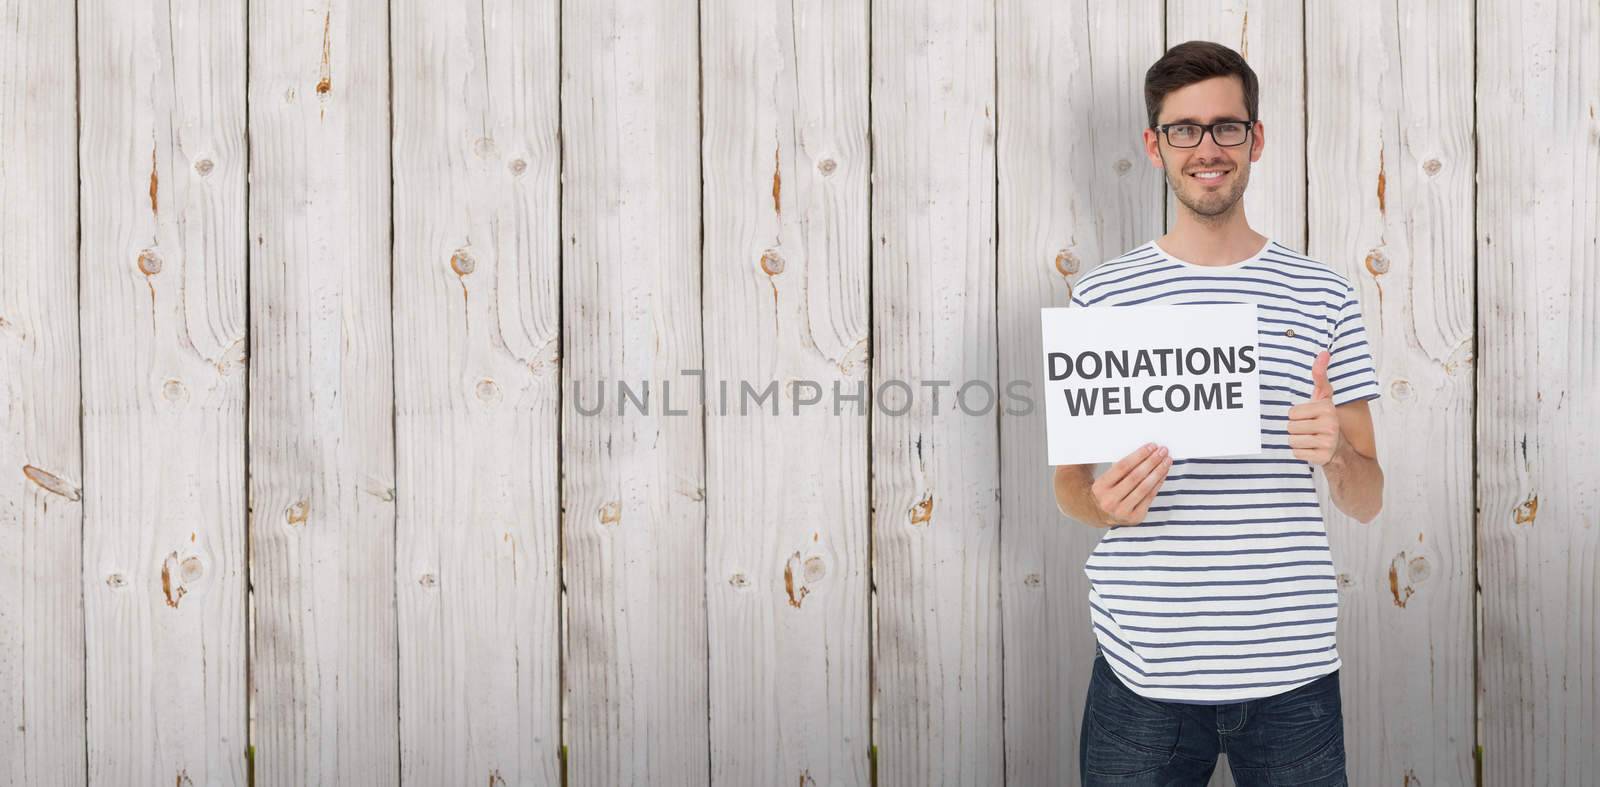 Man holding a donation welcome note while gesturing thumbs up against wooden background